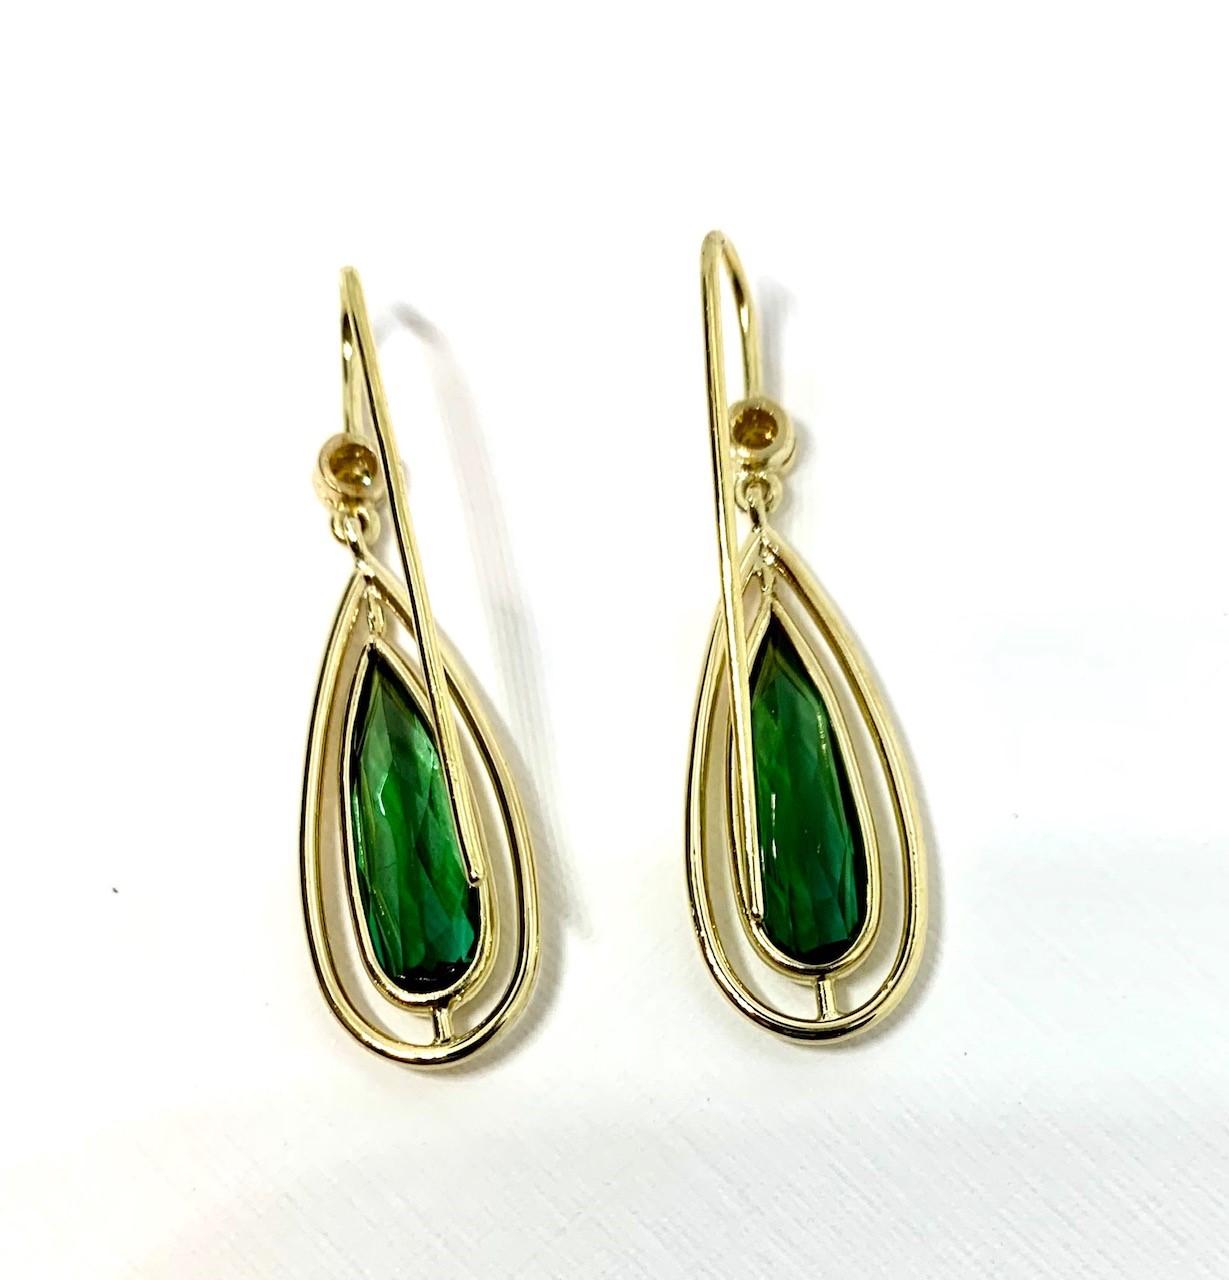  Green Tourmaline and Yellow Sapphire Dangle Earrings with Yellow Gold Halos In New Condition For Sale In Los Angeles, CA